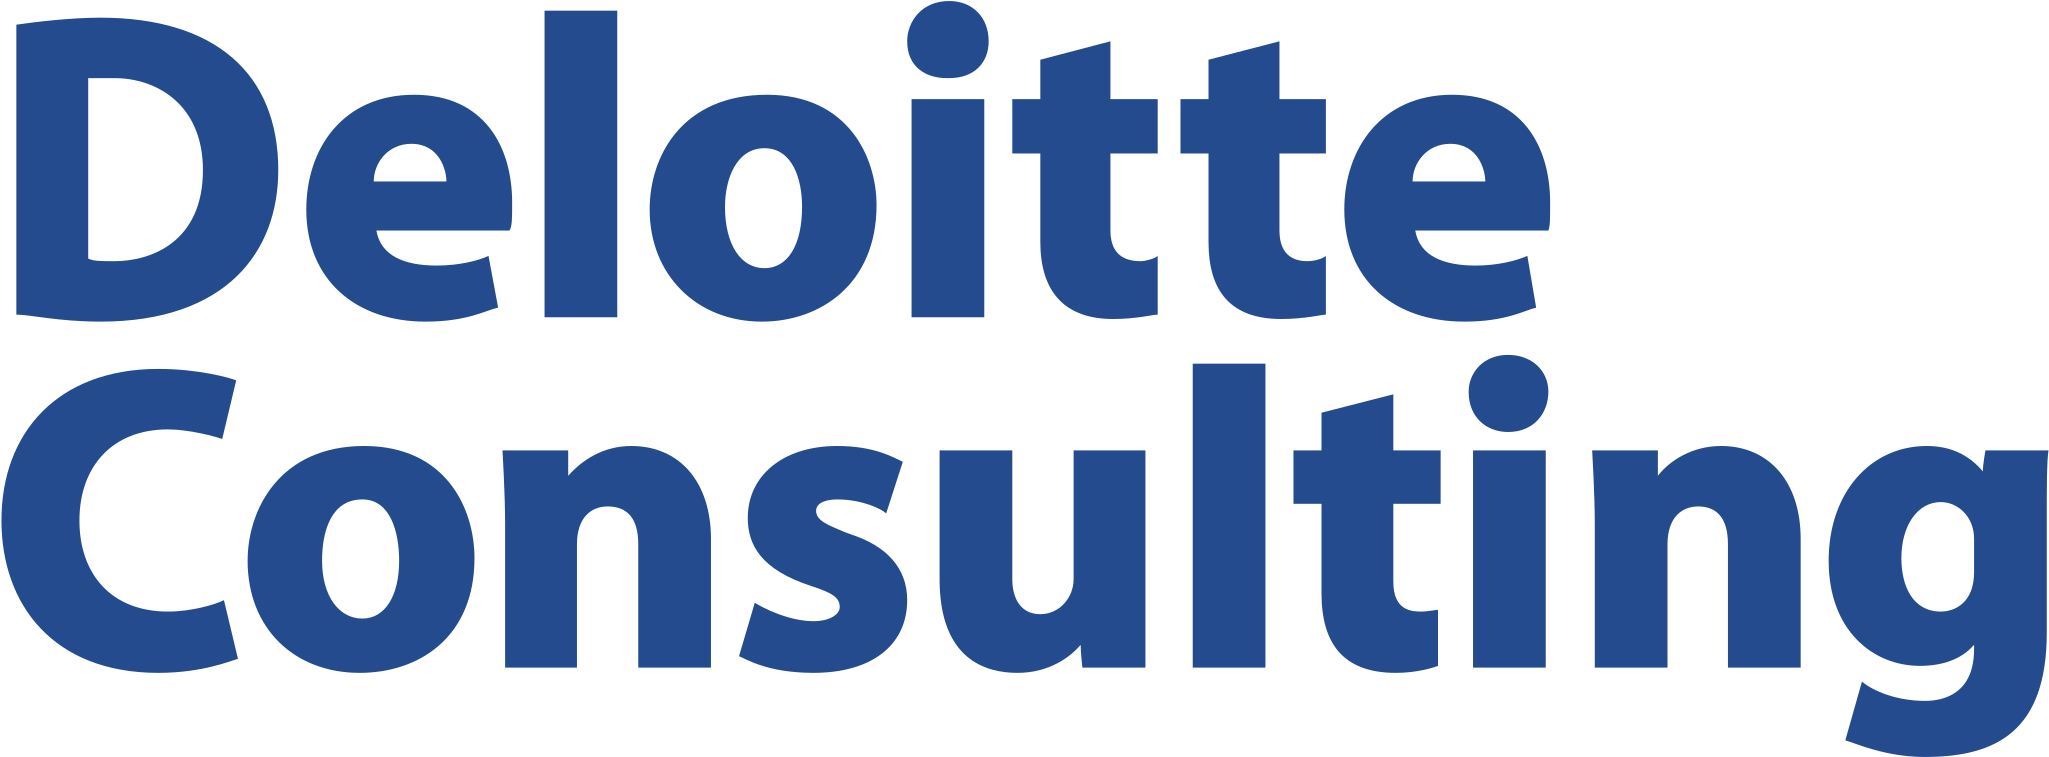 Deloitte Consulting Logo Png Transparent - Deloitte Management Consulting Logo Clipart (2400x2400), Png Download